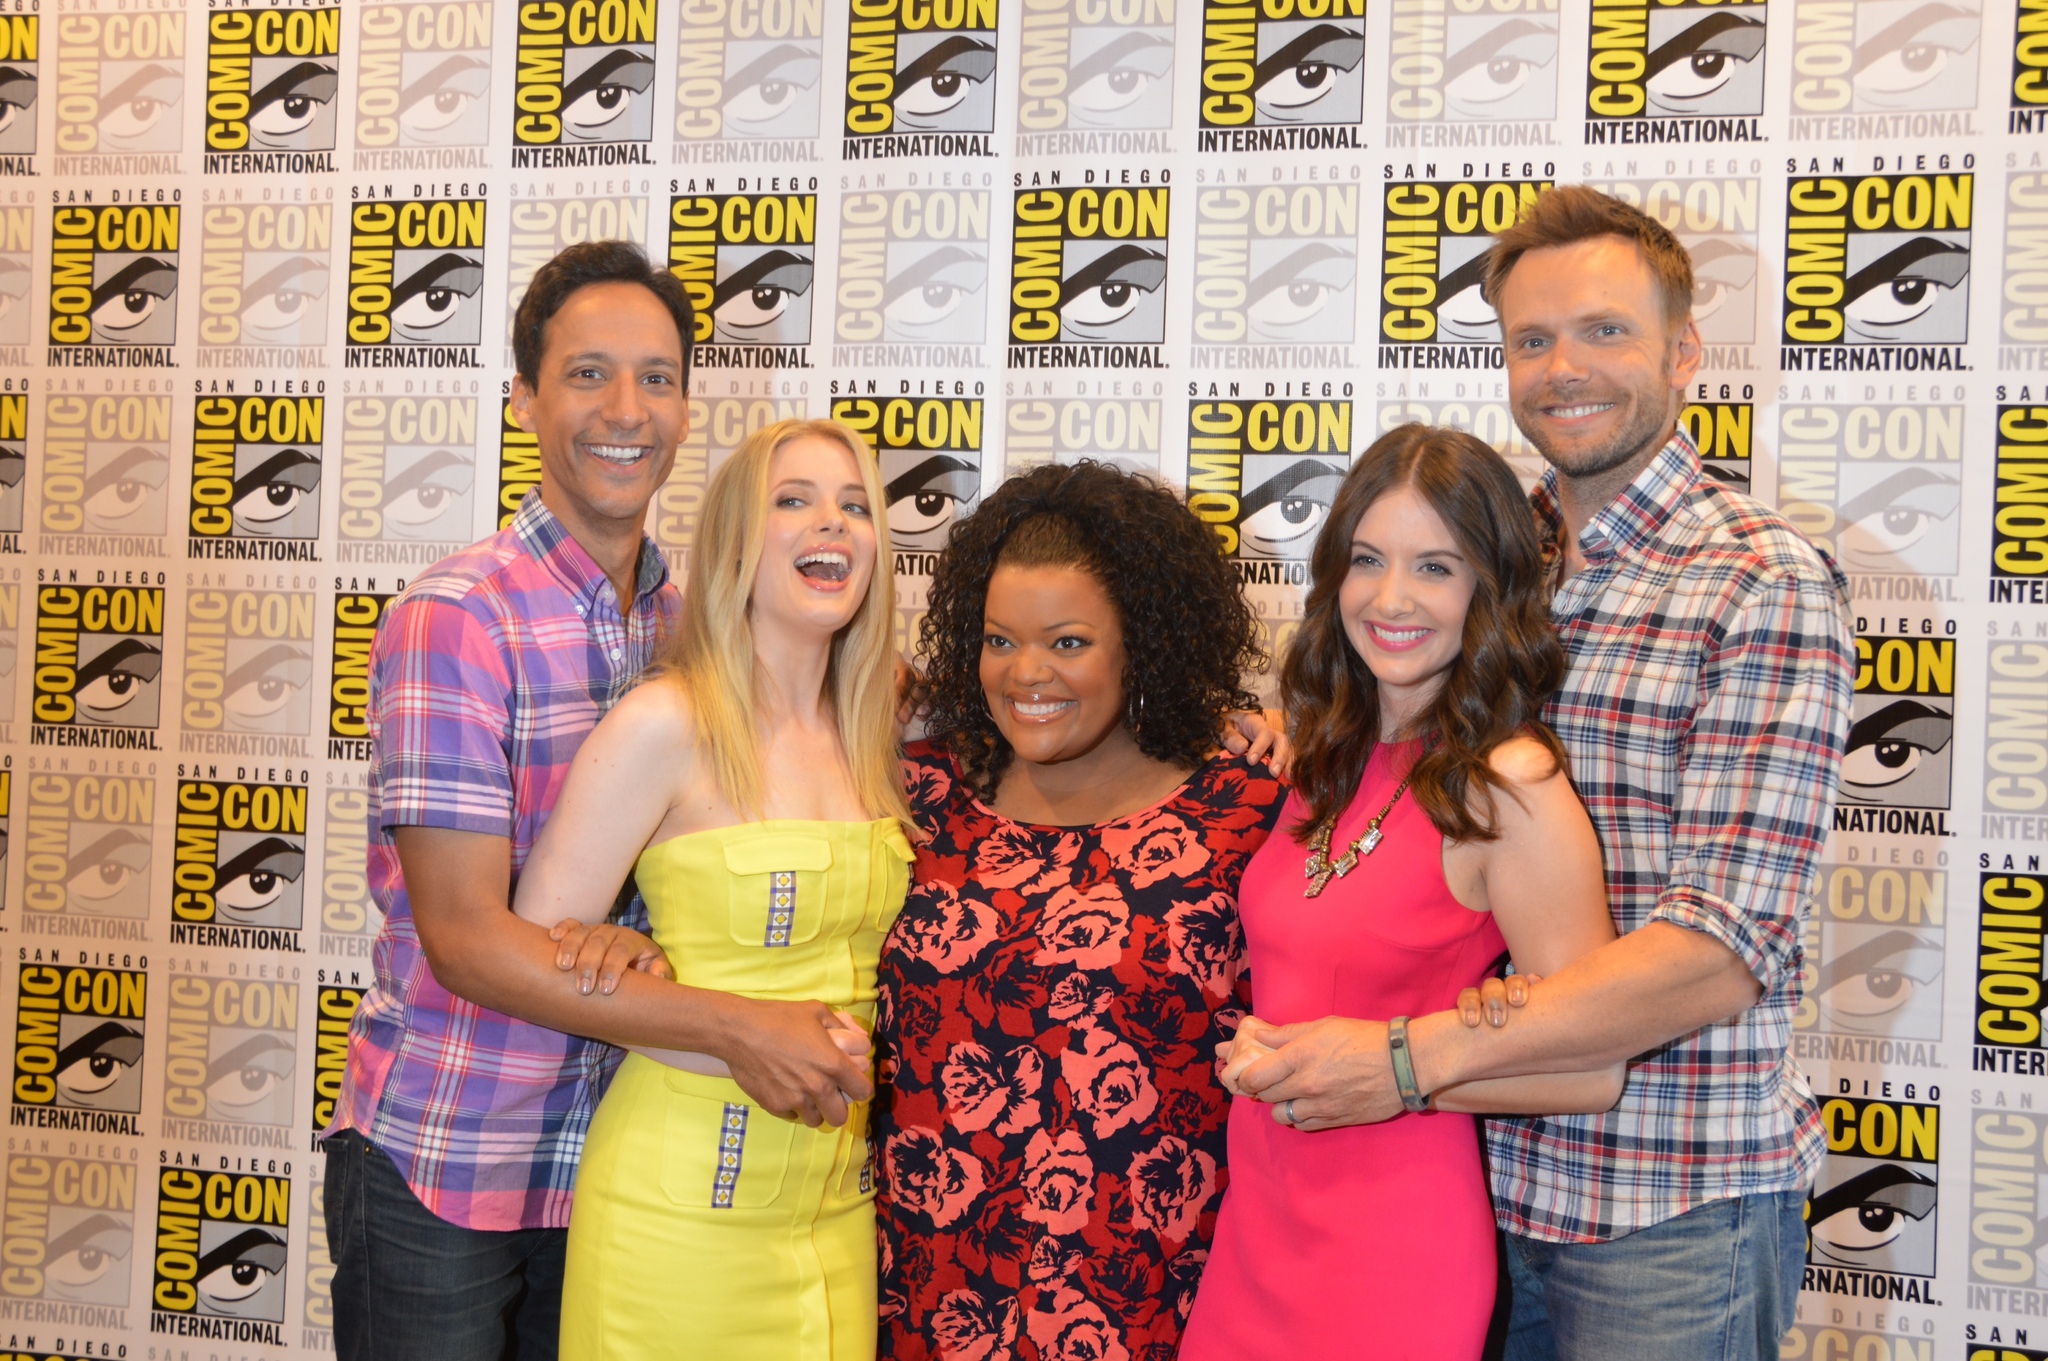 Joel McHale, Yvette Nicole Brown, Alison Brie, Gillian Jacobs and Danny Pudi at event of Community (2009)